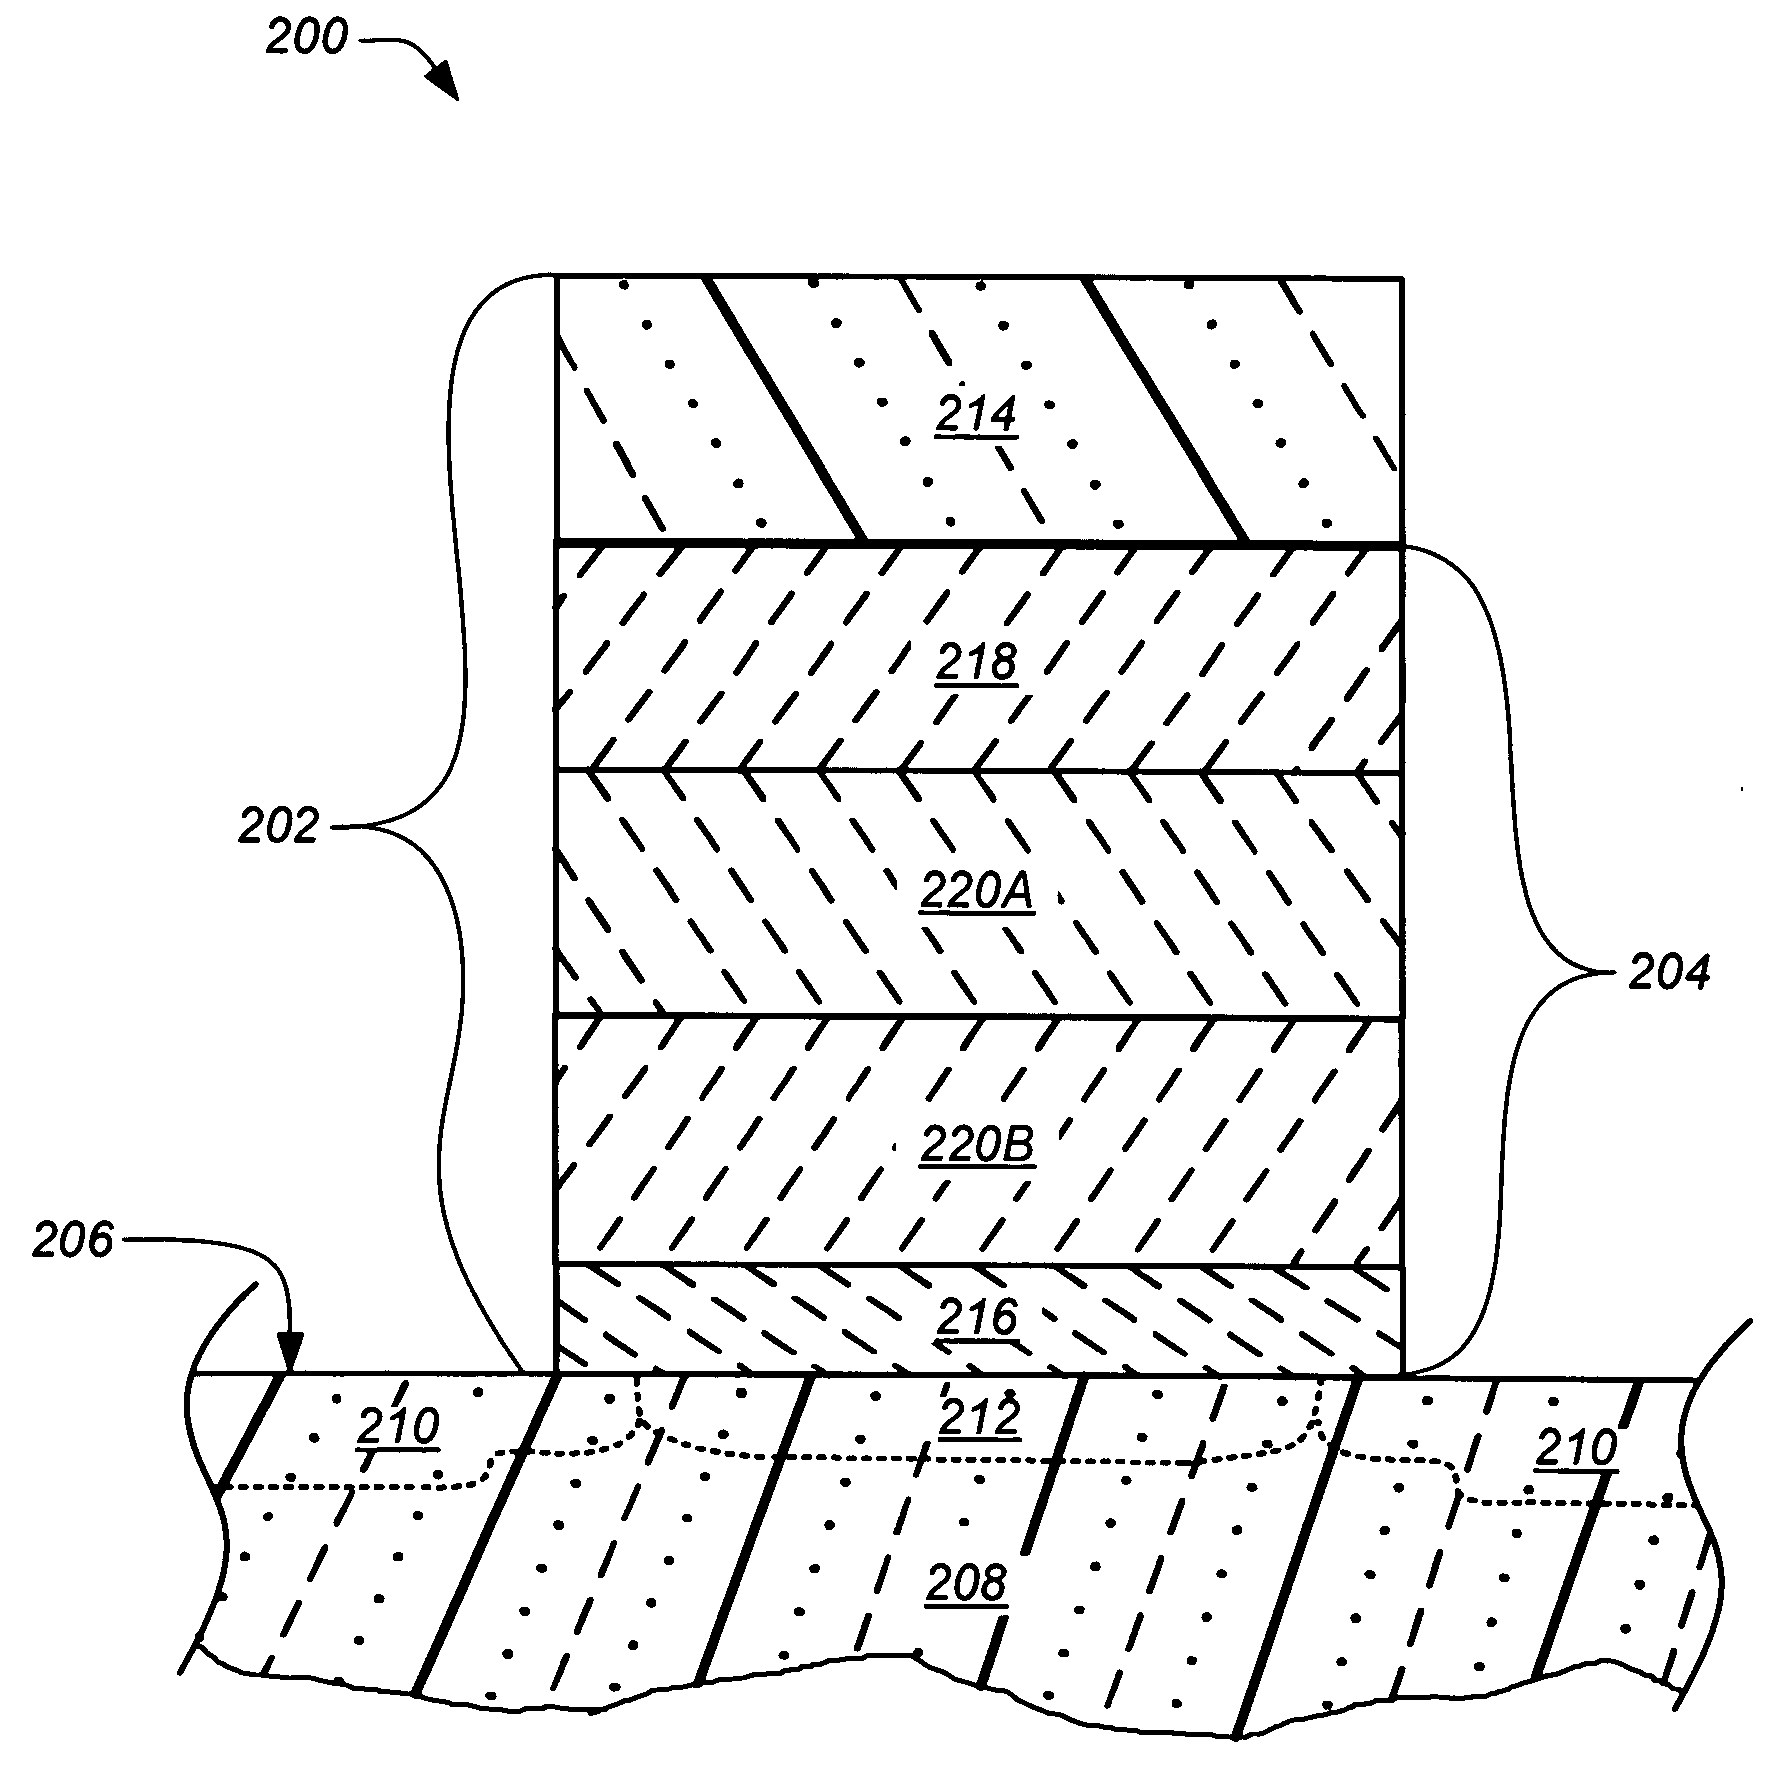 Oxide-nitride-oxide stack having multiple oxynitride layers